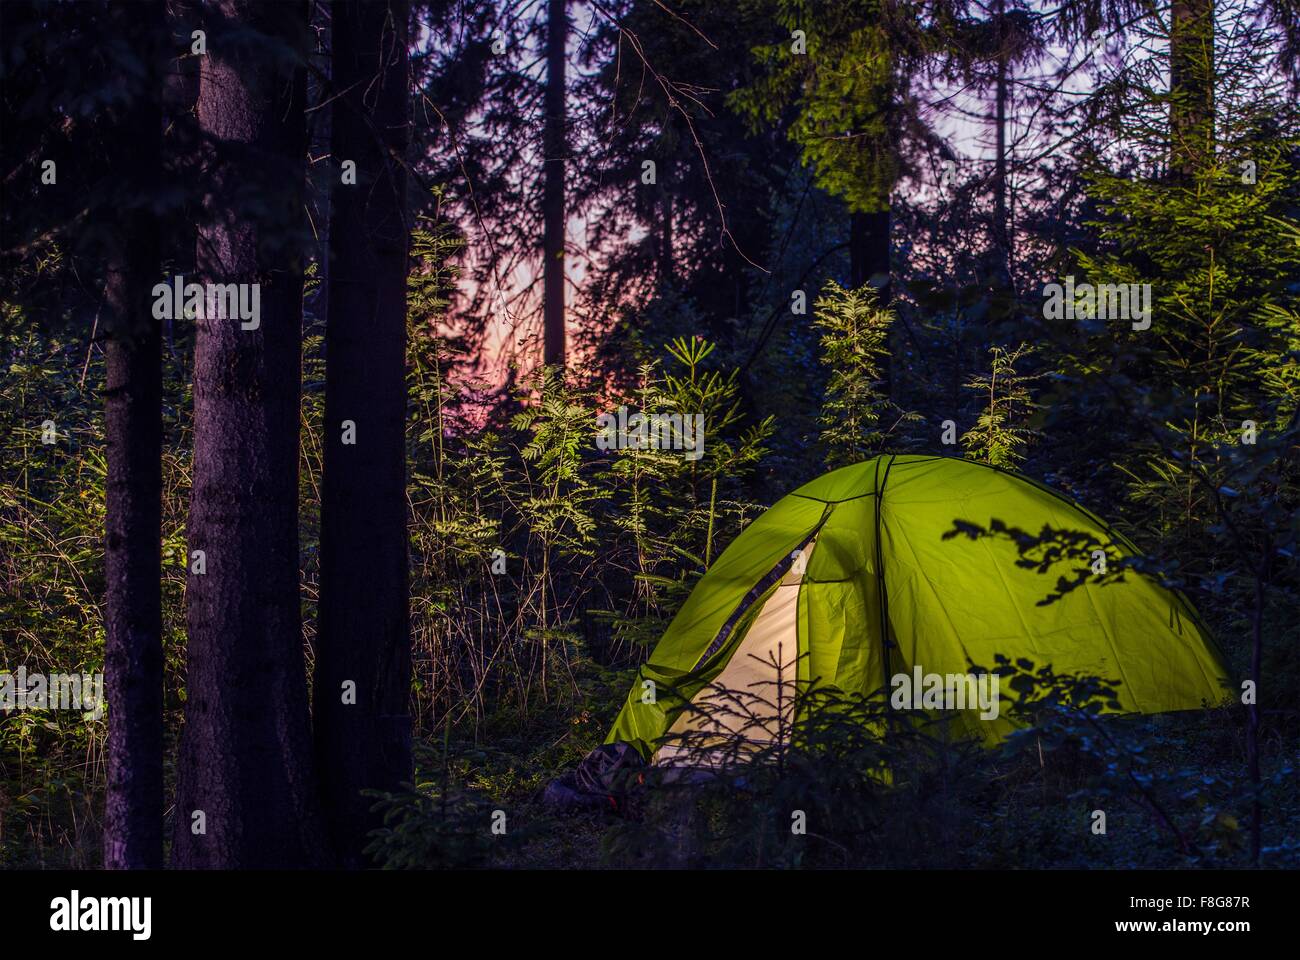 Camping in a Forest. Late Evening on a Camp Site. Green Illuminated Tent Between Spruce Trees. Outdoor Lifestyle. Stock Photo